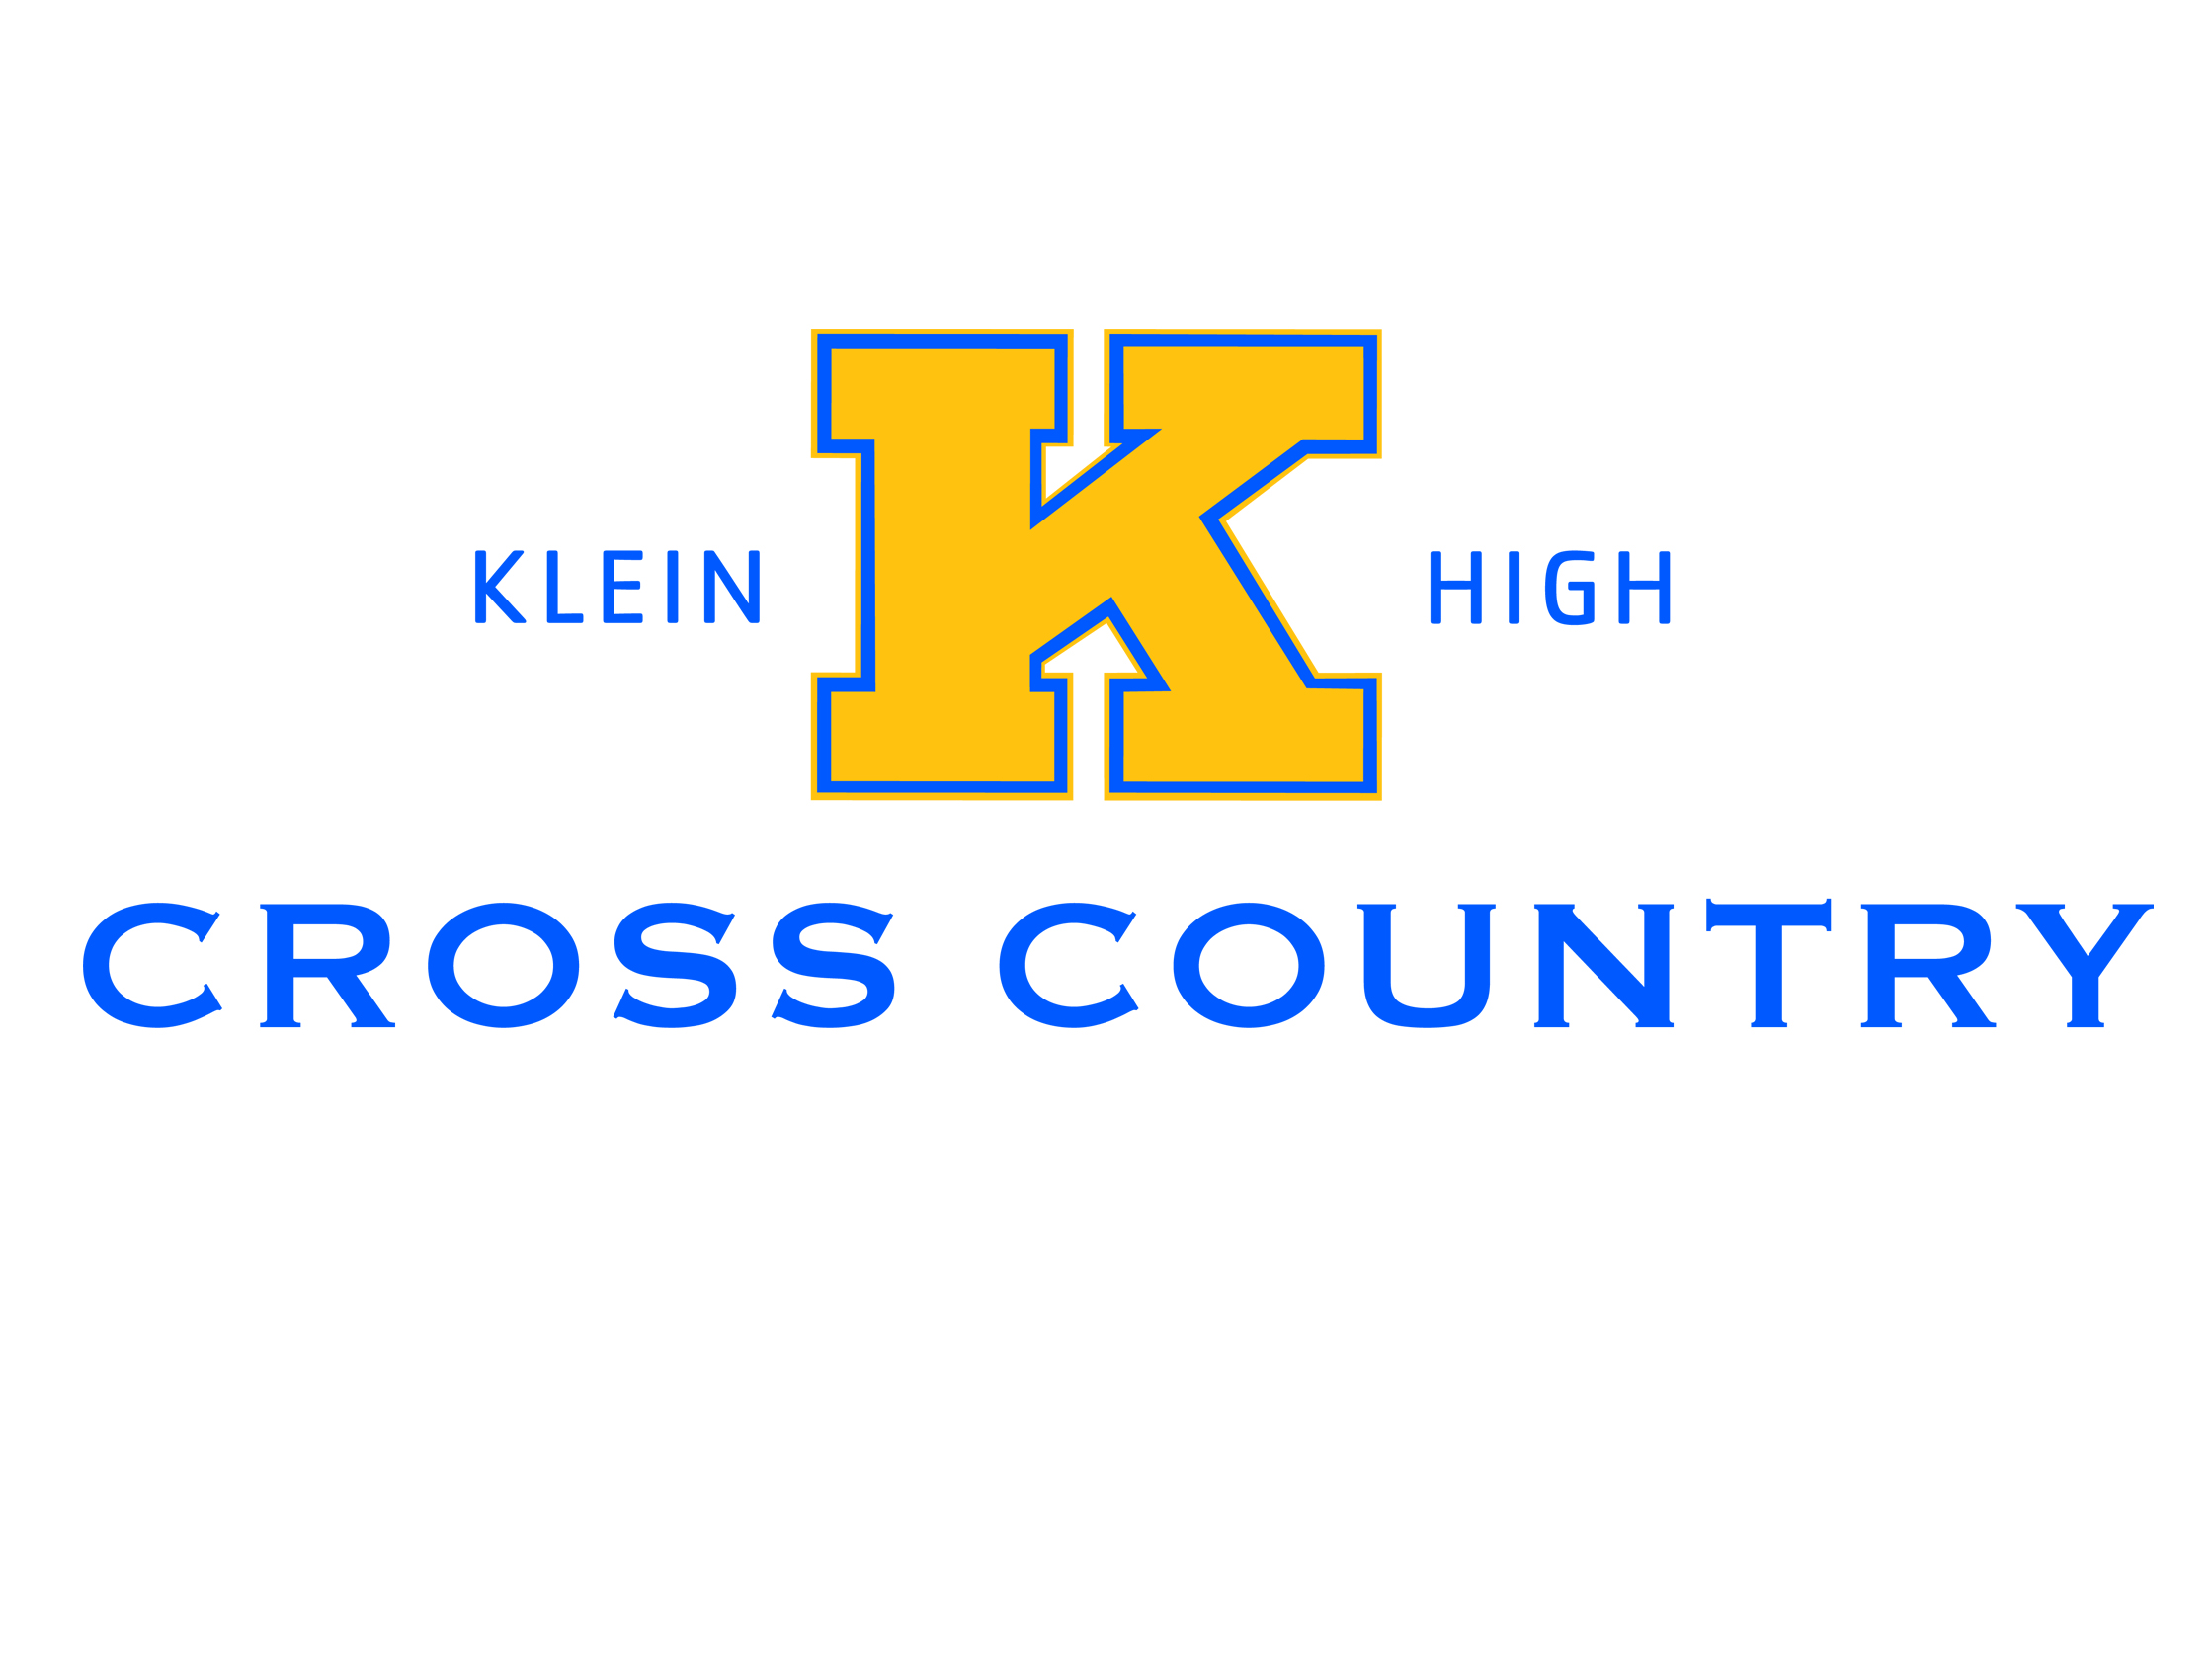 Klein Cross Country